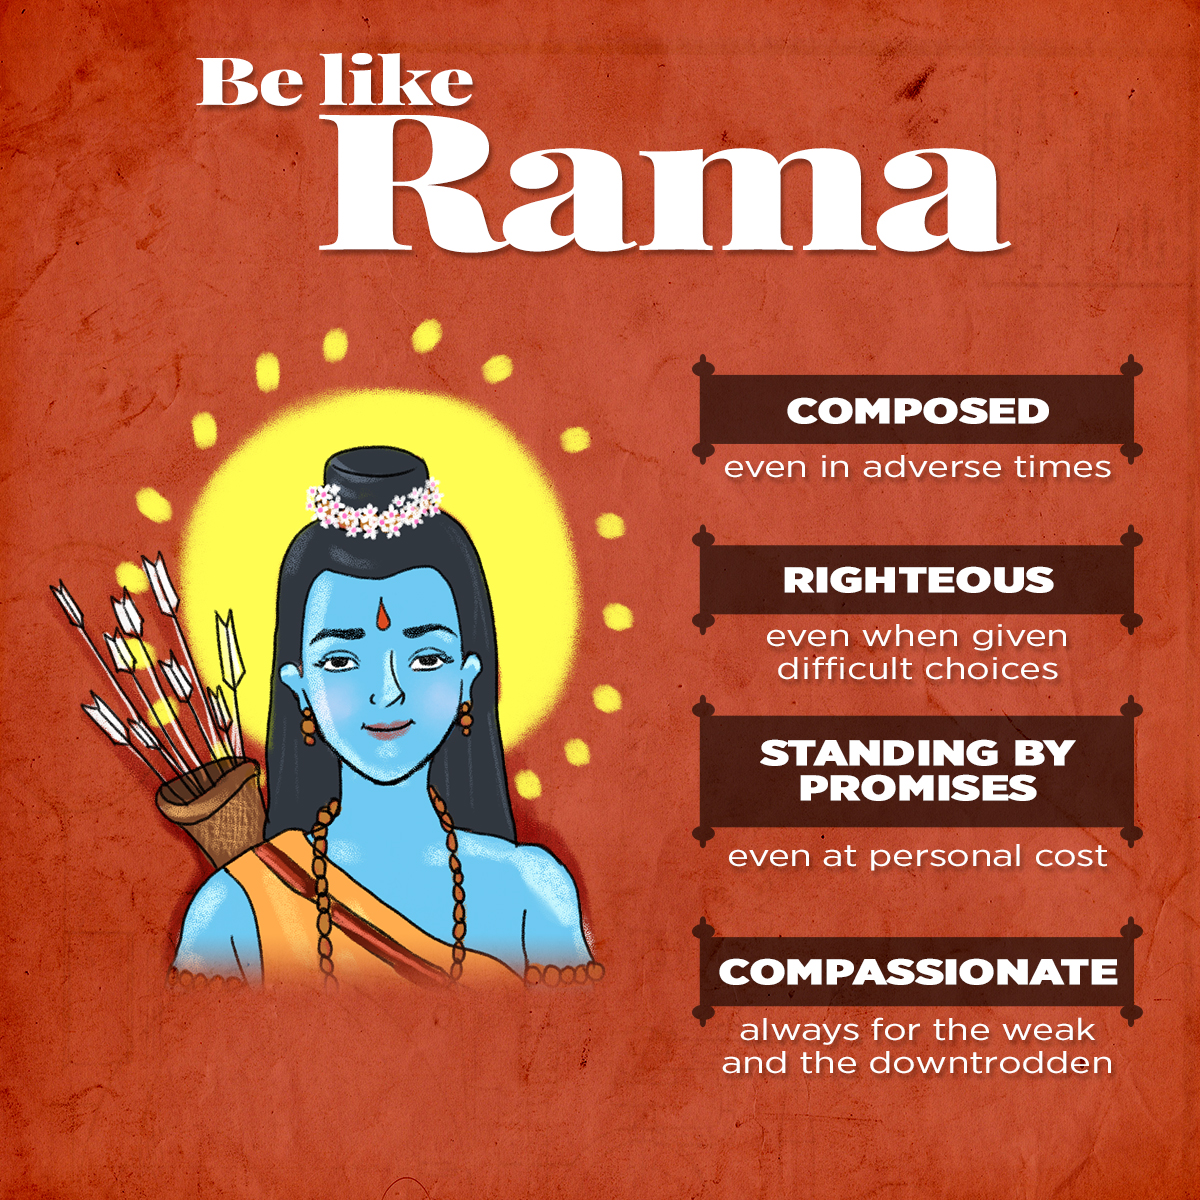 Ramayana is a timeless epic celebrated across the world. Each & every personage from the epic teaches priceless values to us. 1. Be like Rama - righteous, composed, compassionate & much more #LessonsFromRamayana  #JaiShriRam  #RamMandir